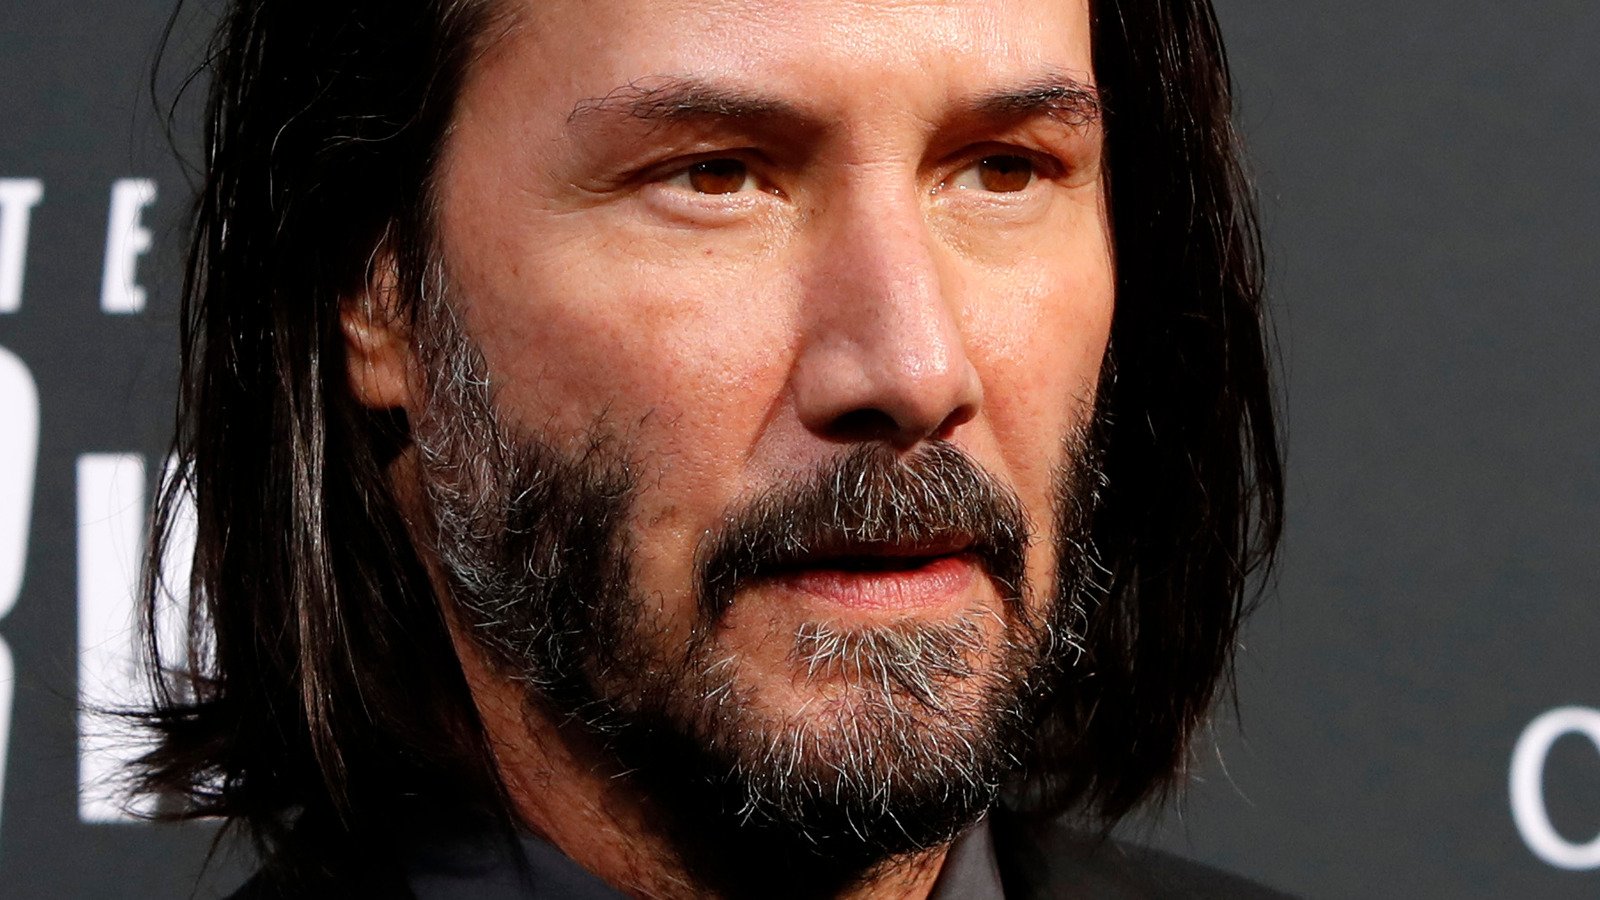 Even His Biggest Fans Have Some Pretty Harsh Opinions On Keanu Reeves' Acting - Looper